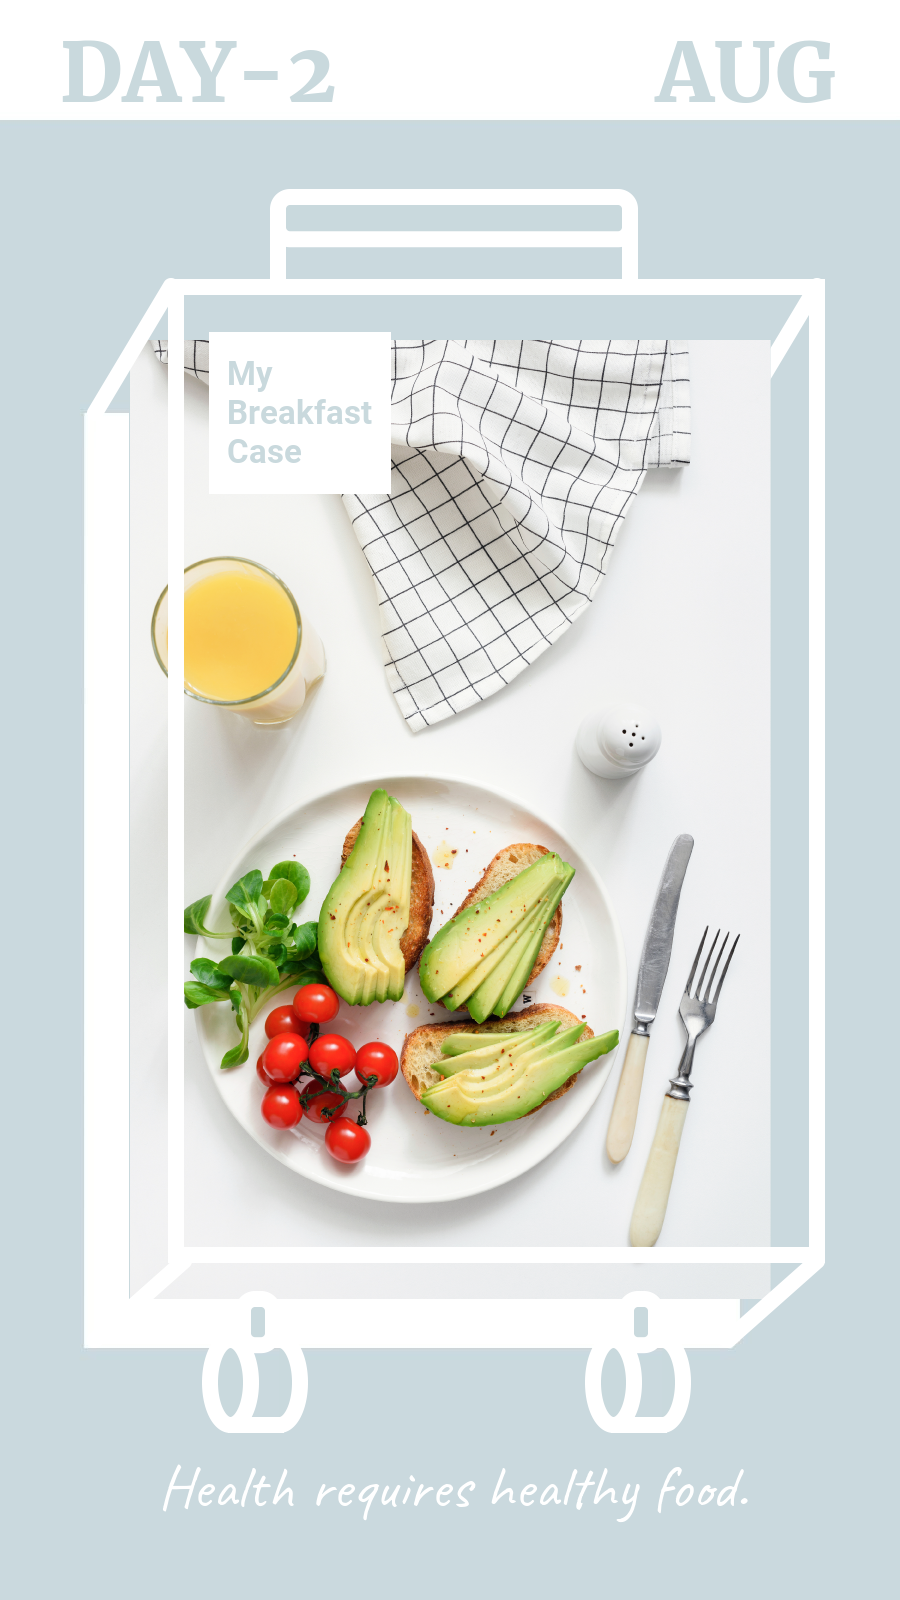 Special Frame Healthy Food Salad Photo Breakfast Fashion Simple Style Poster Instagram Story预览效果